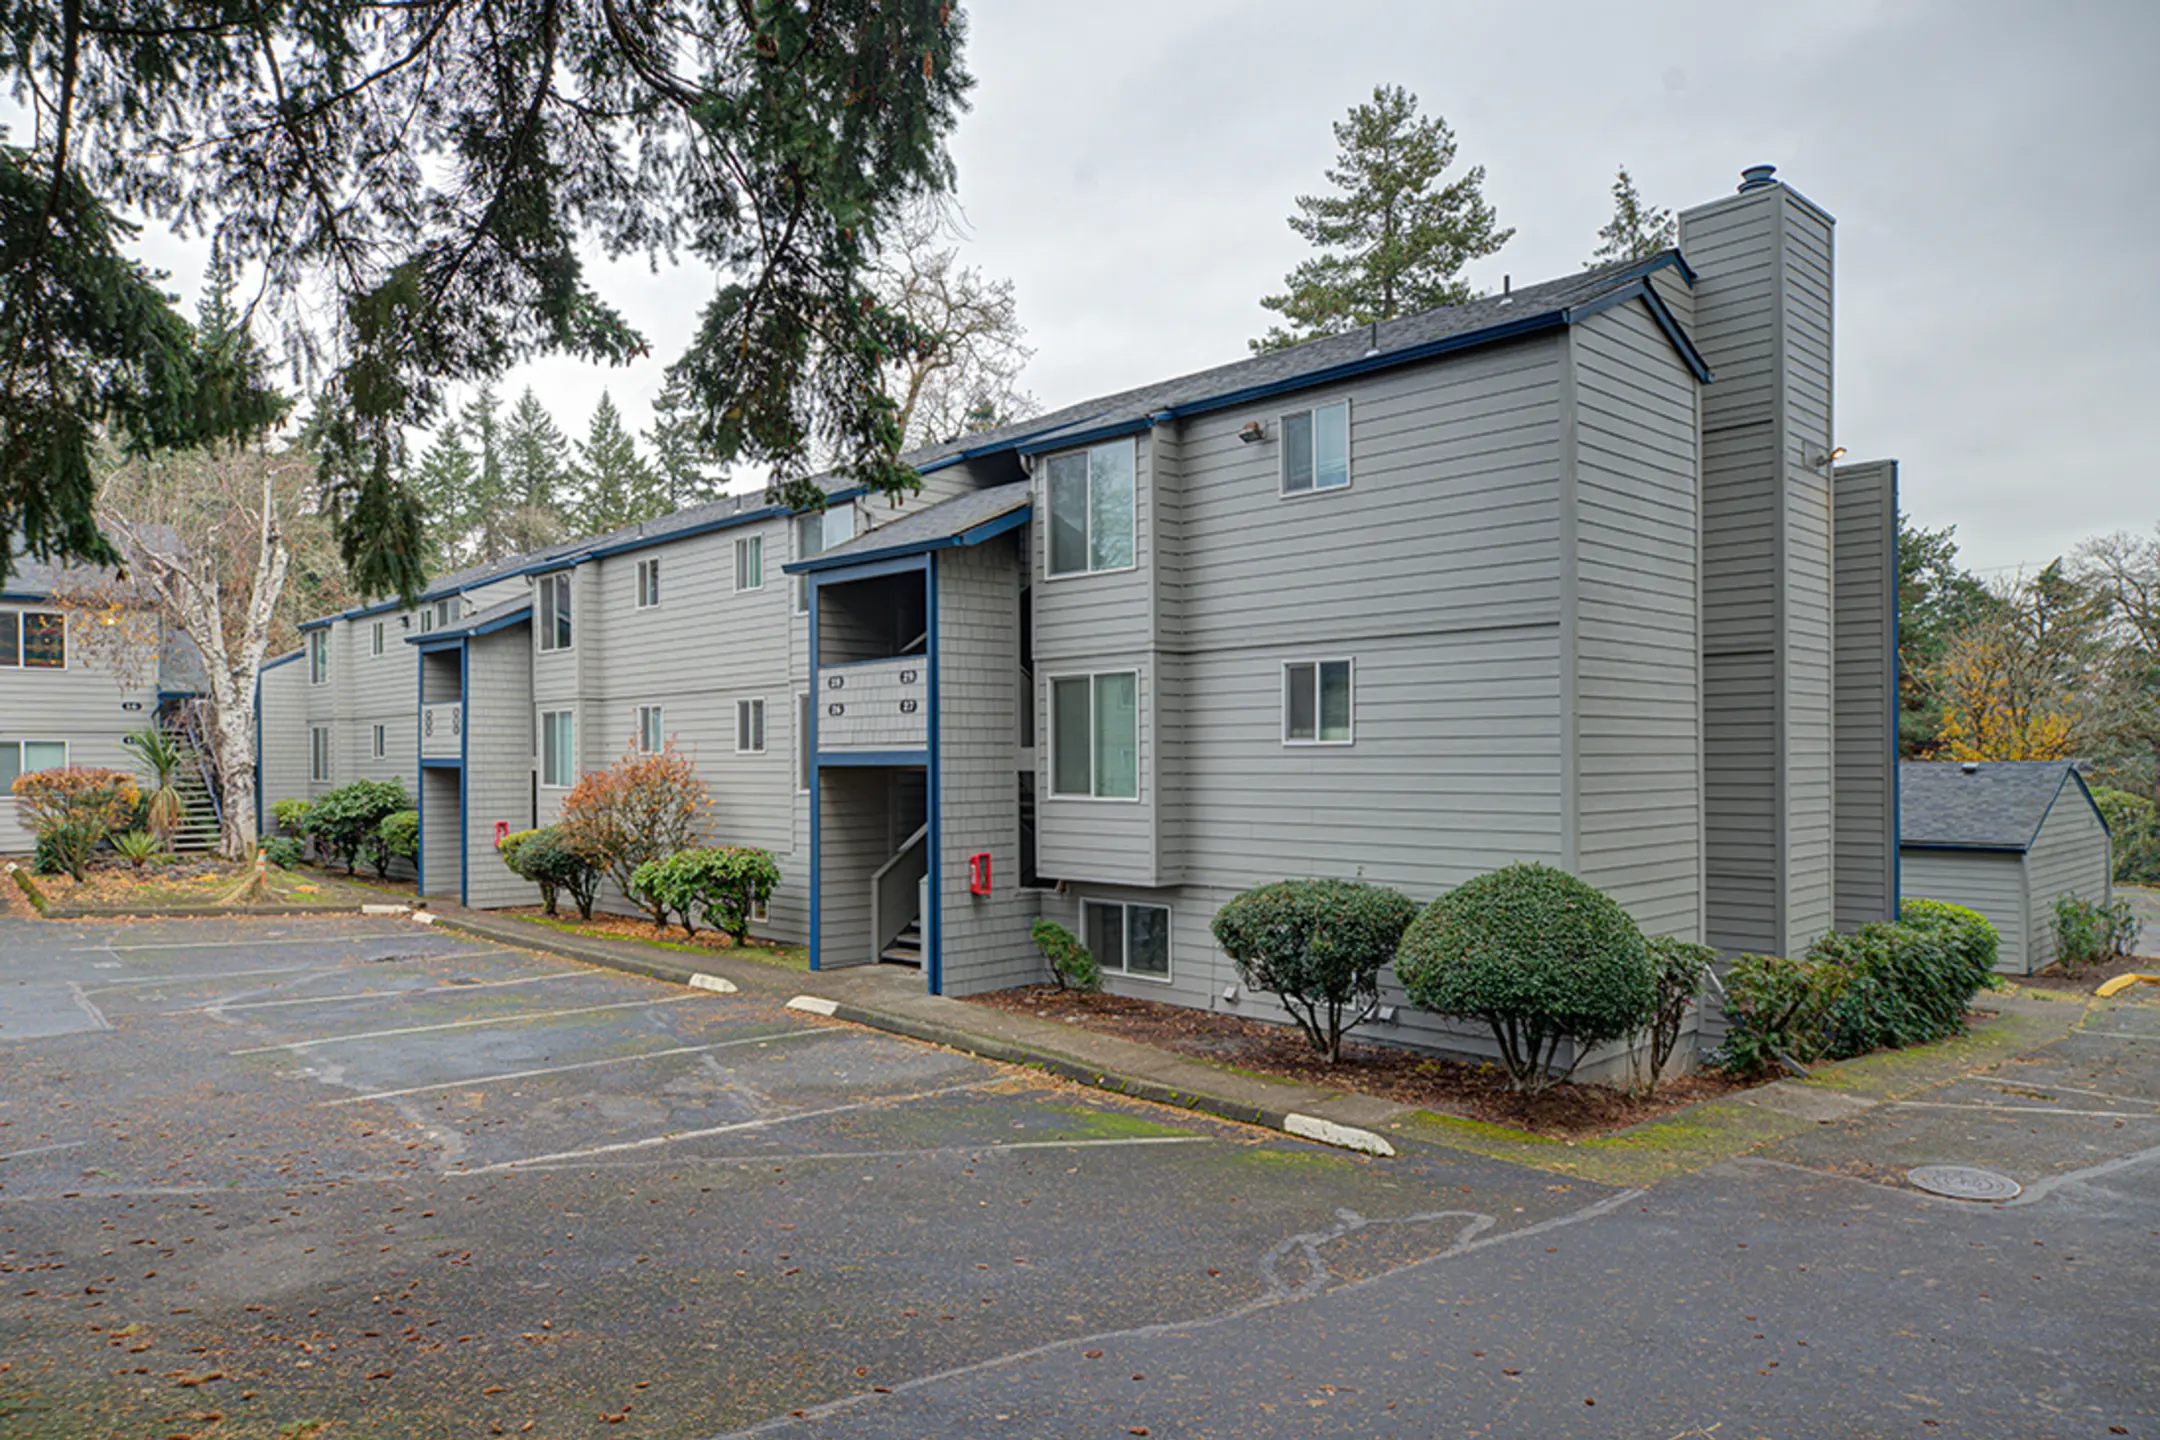 Building - Riverview - Milwaukie, OR